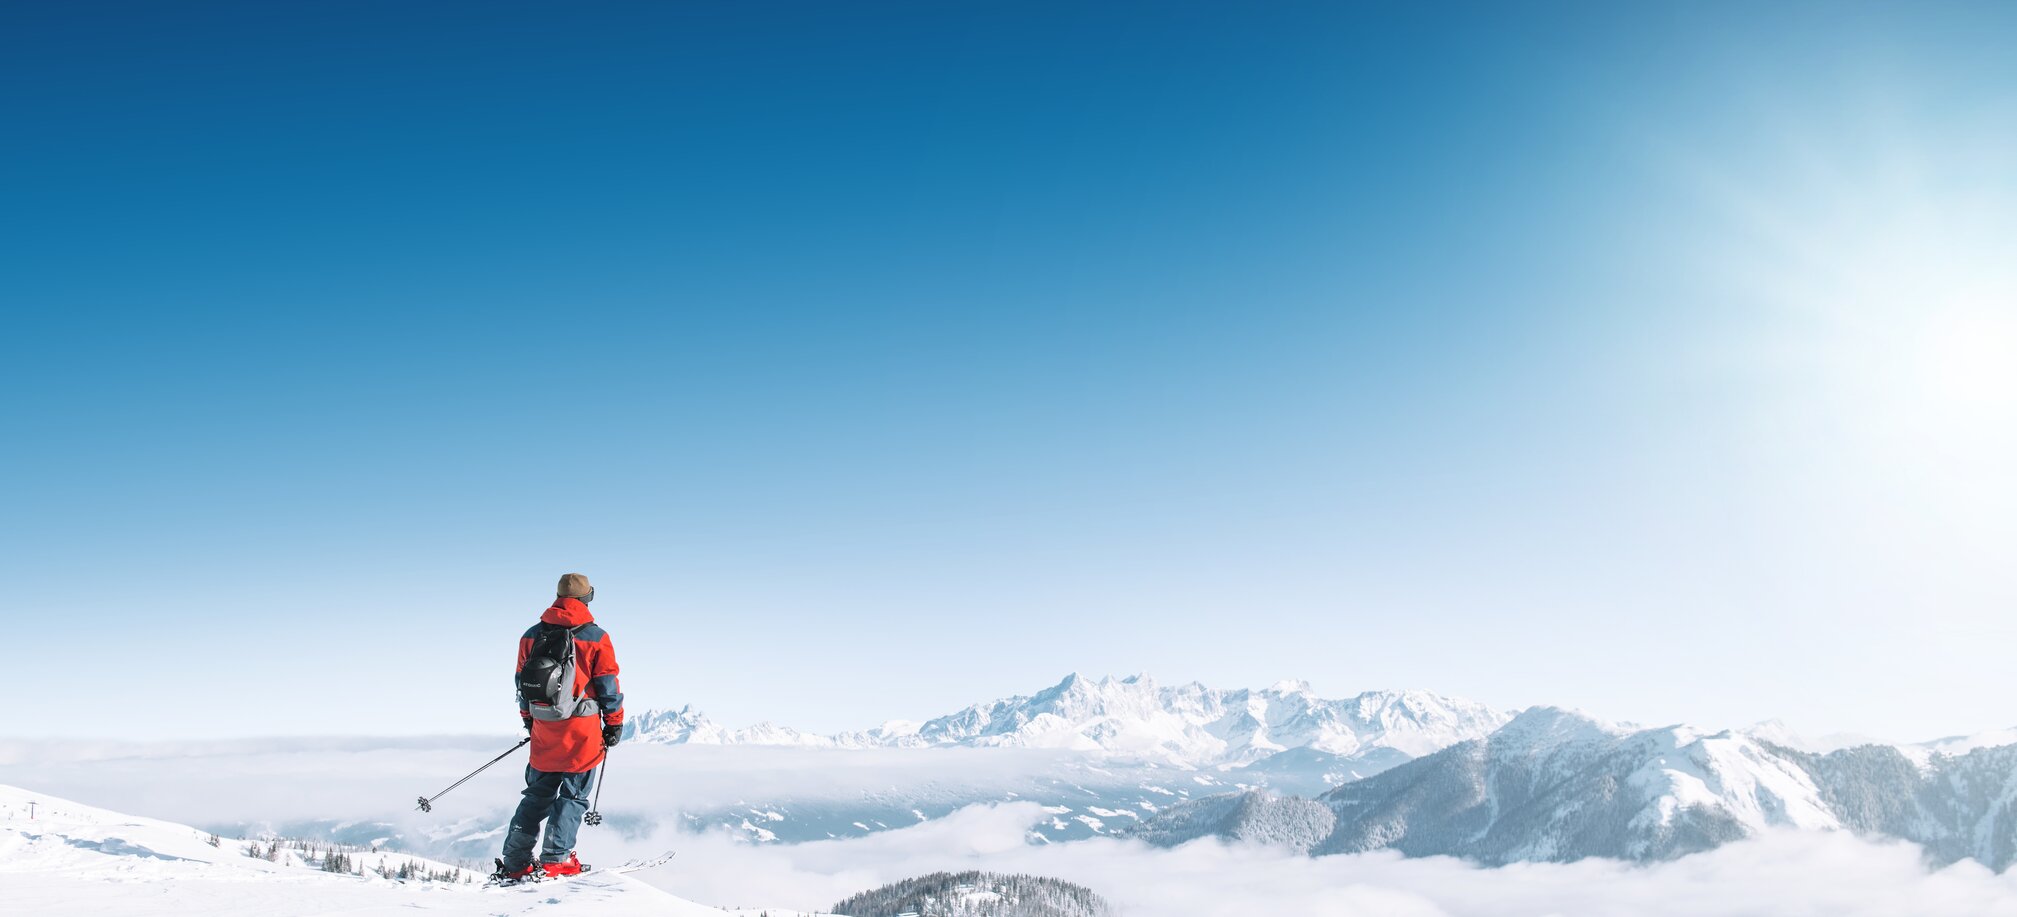 Skier with red ski jacket stands on the snow and looks at the surrounding mountains